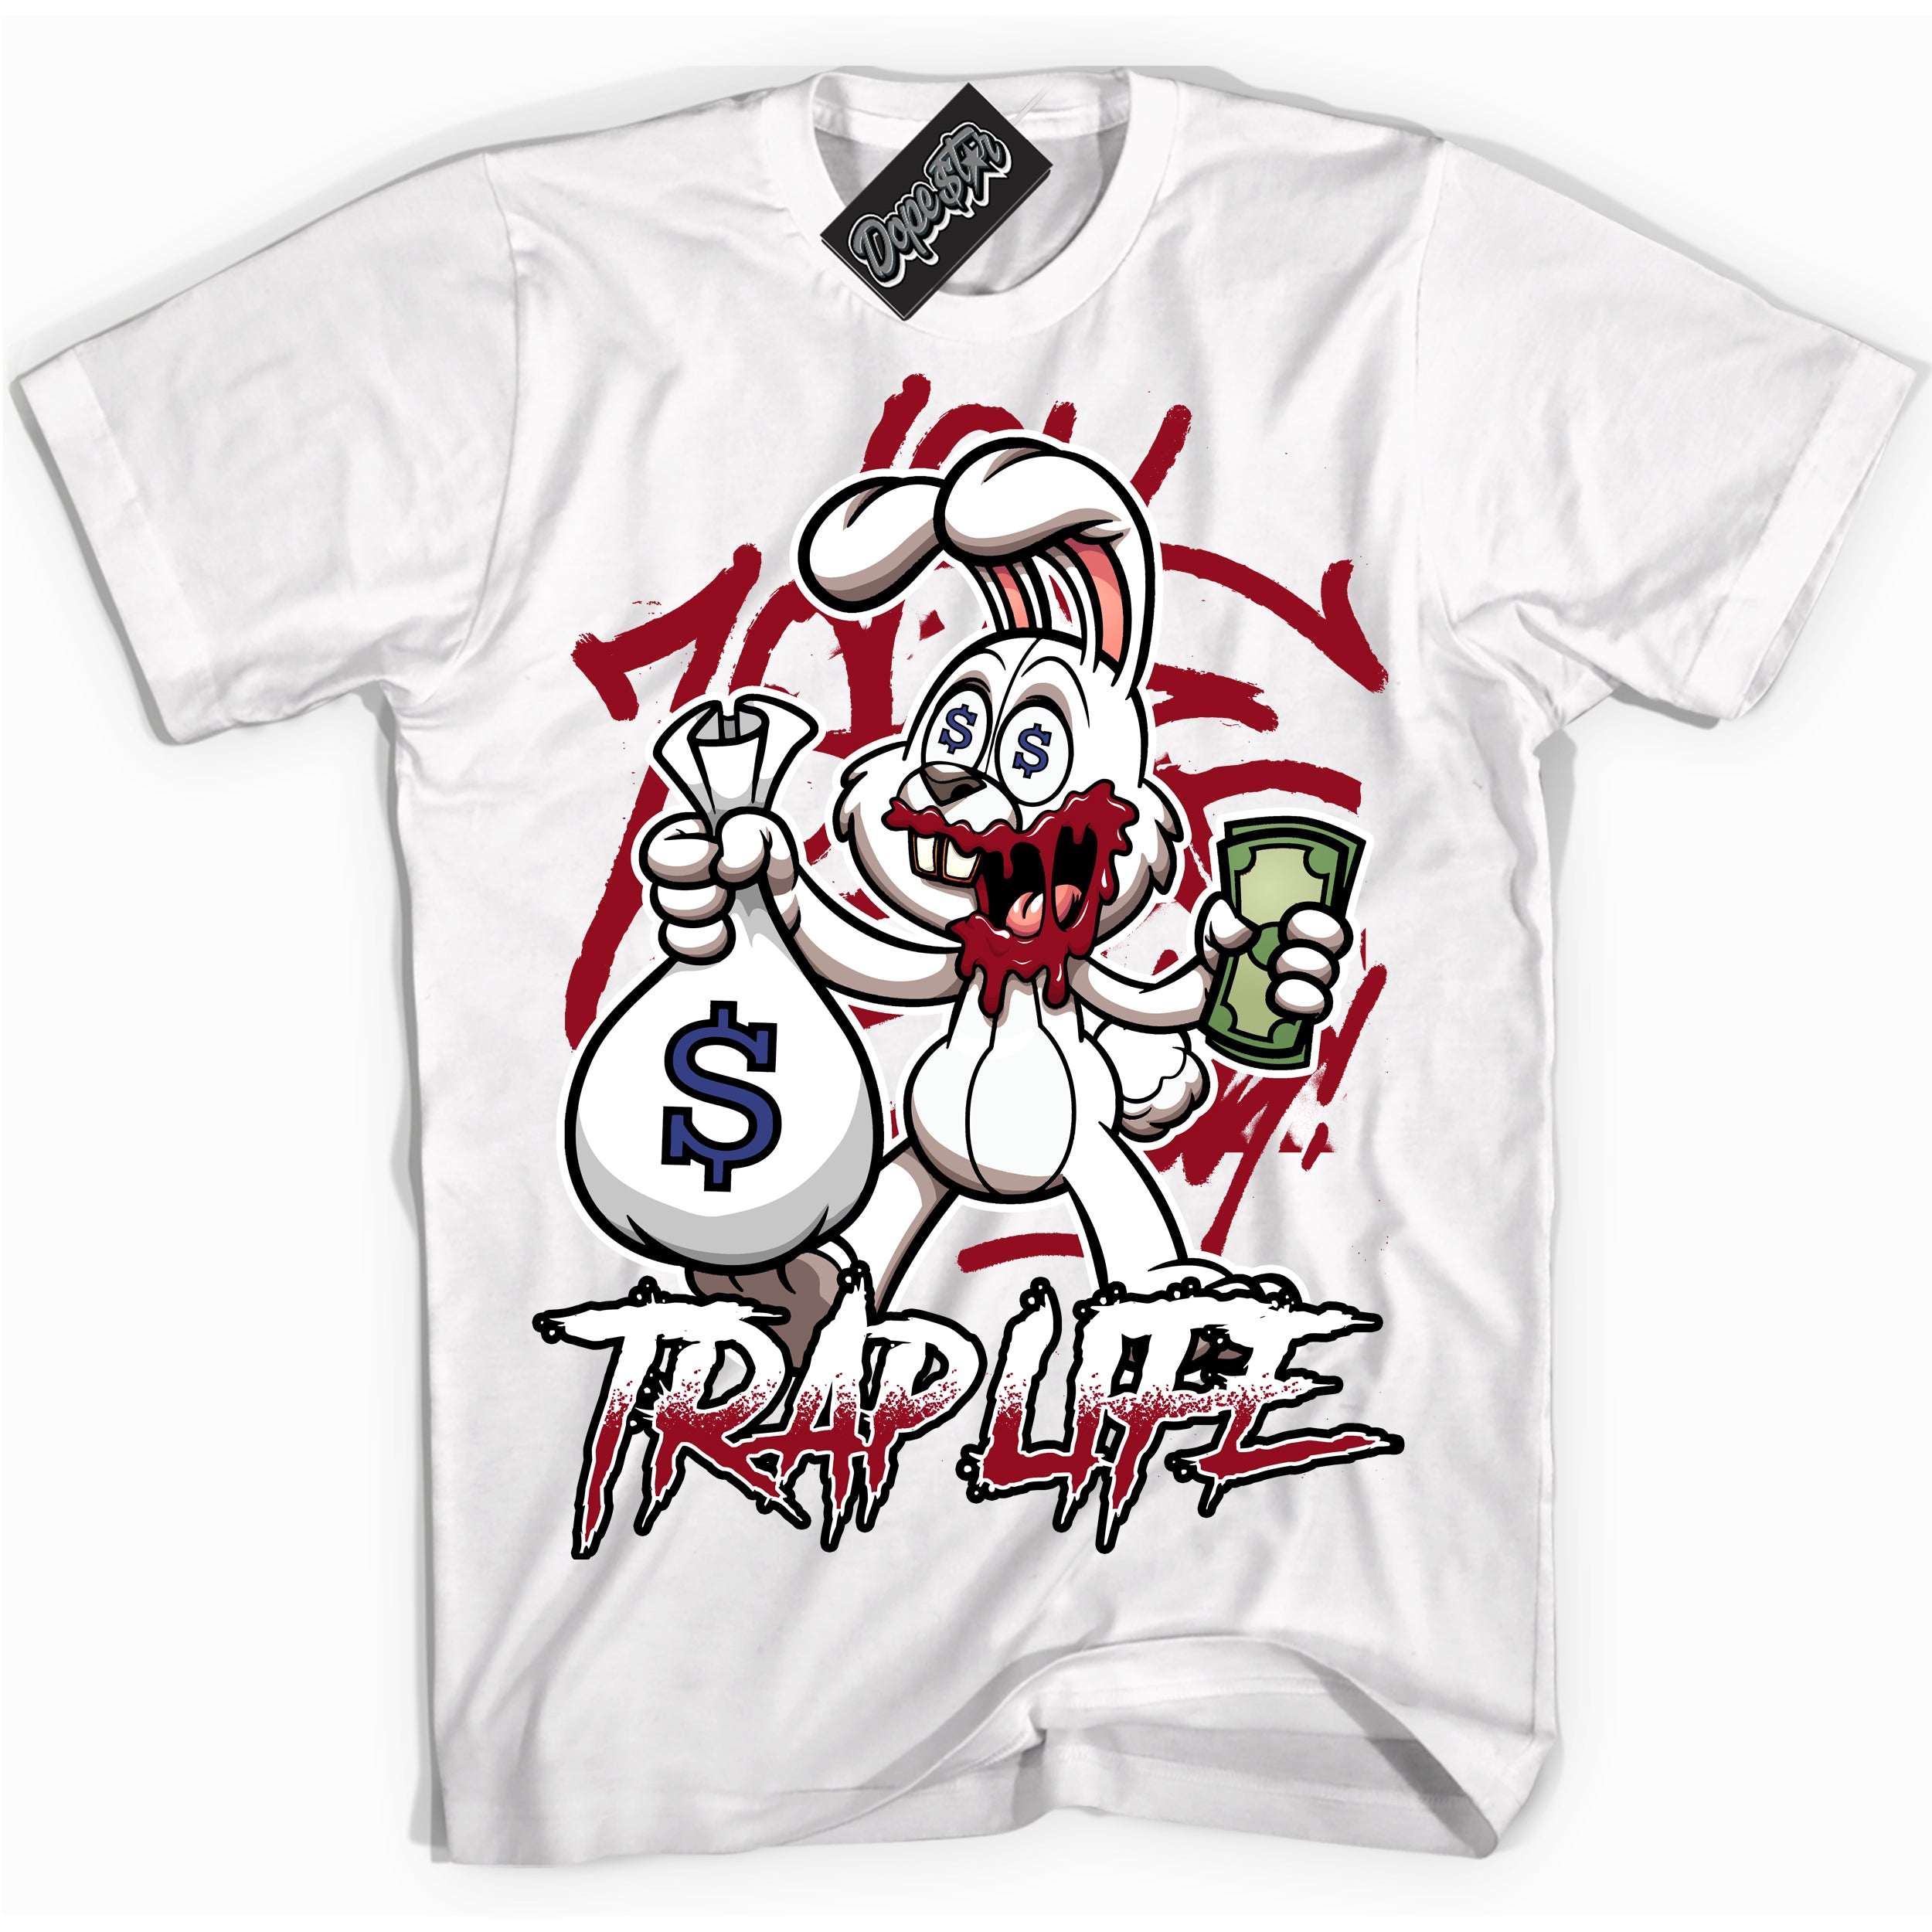 Cool White Shirt with “ Trap Rabbit ” design that perfectly matches Playoffs 8s Sneakers.